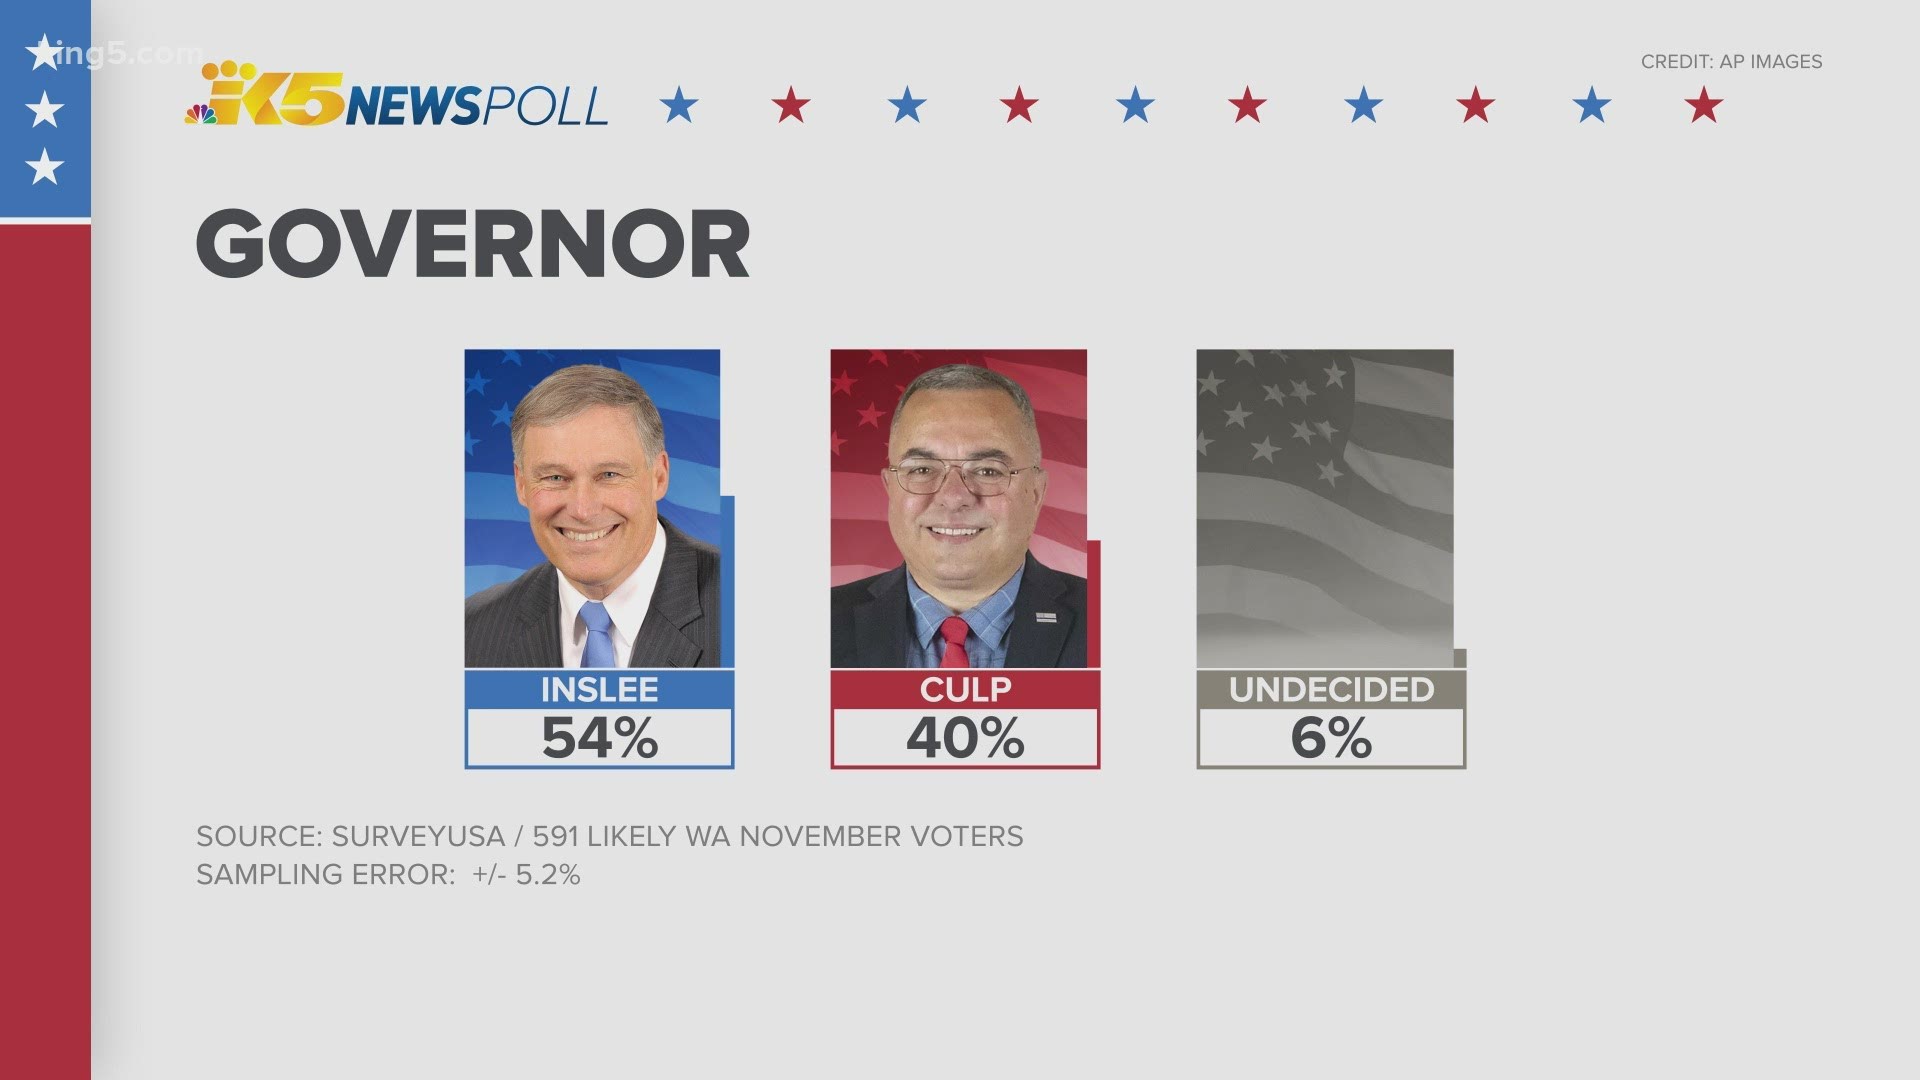 If the election for governor were today, an exclusive KING 5 News poll found 54% of voters surveyed would vote for Jay Inslee and 40% would vote for Loren Culp.